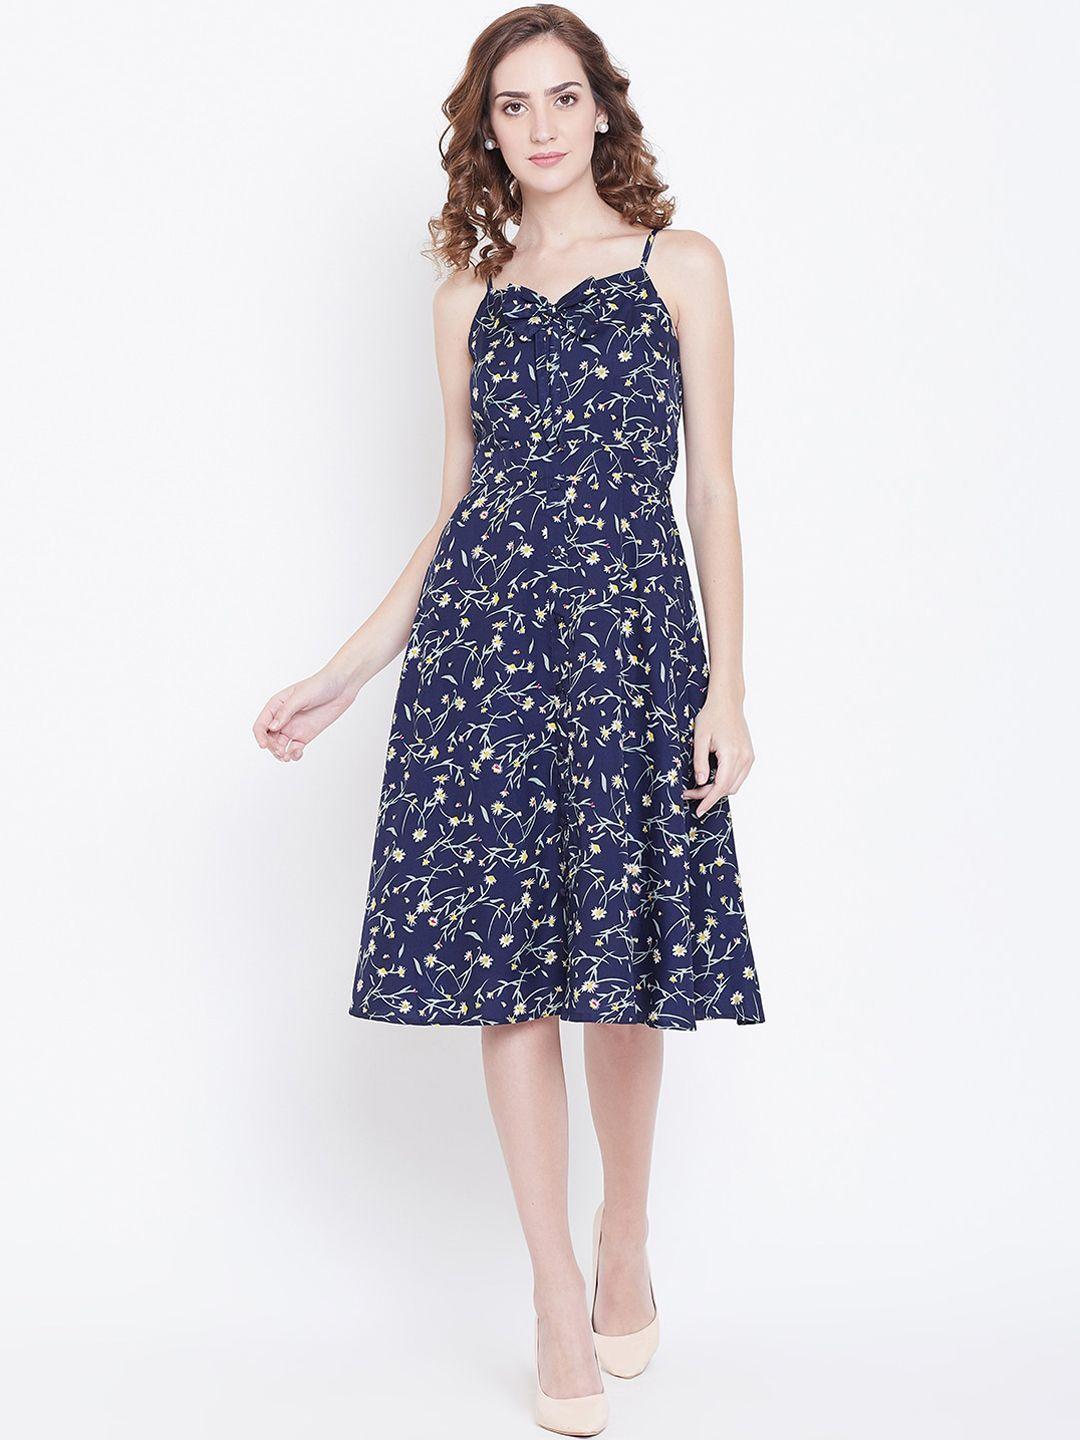 dodo & moa women navy blue printed fit and flare dress